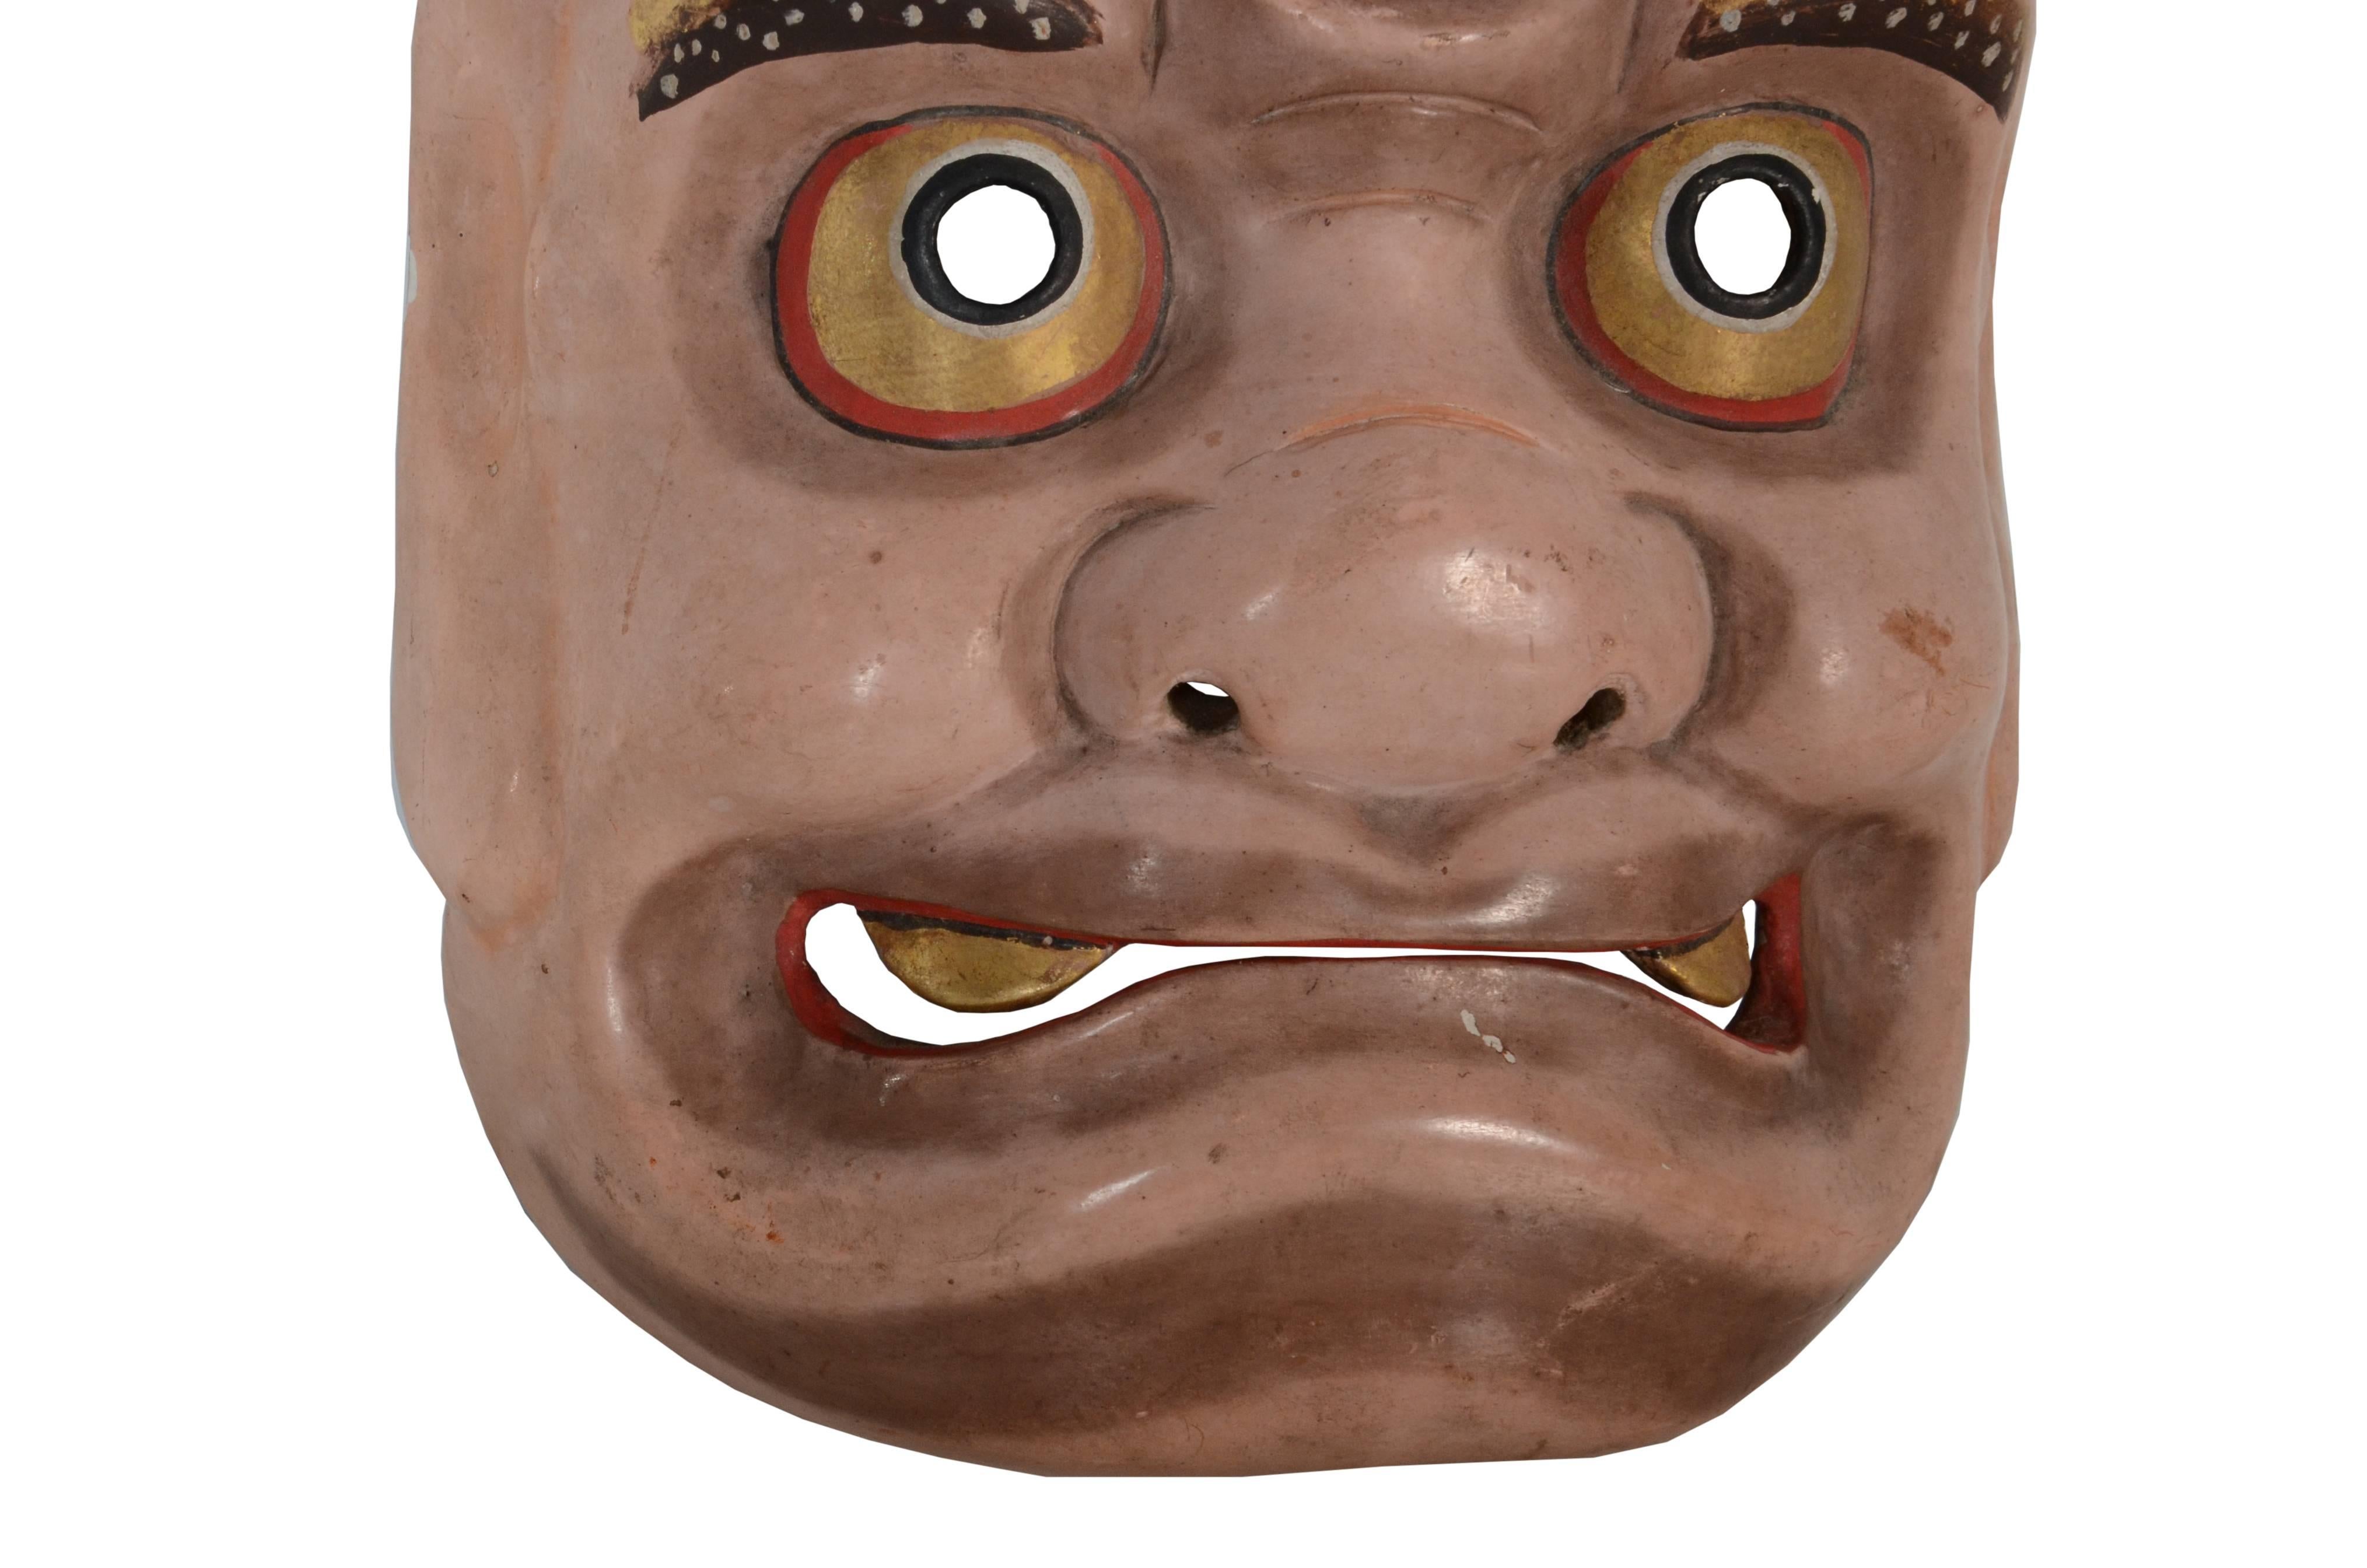 Unusual Japanese Folk Art theatre mask depicting the playful character Mitsumekozo, a three eyed goblin often portrayed as a mischevious creature in comical plays, late Meiji period, circa 1900

Overall the piece is in Fine condition but does have